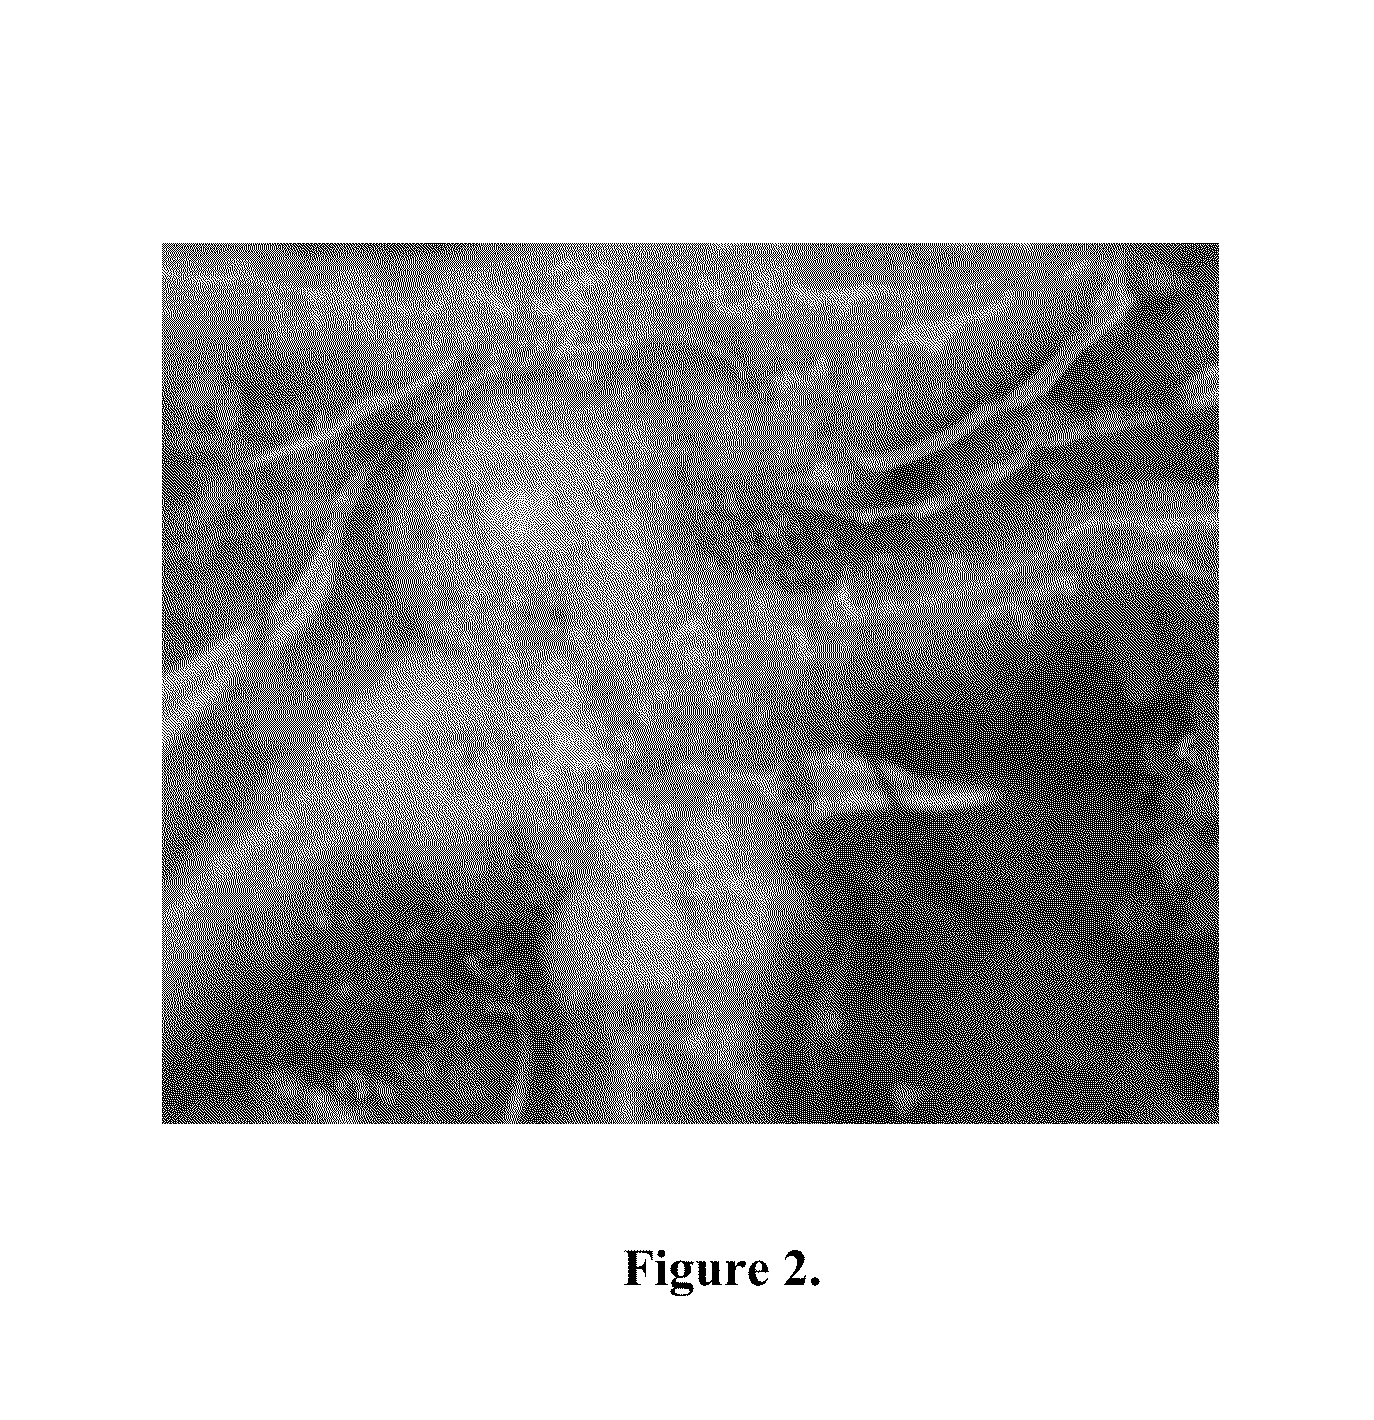 Adhesive medical products and methods for treating gastrointestinal lesions